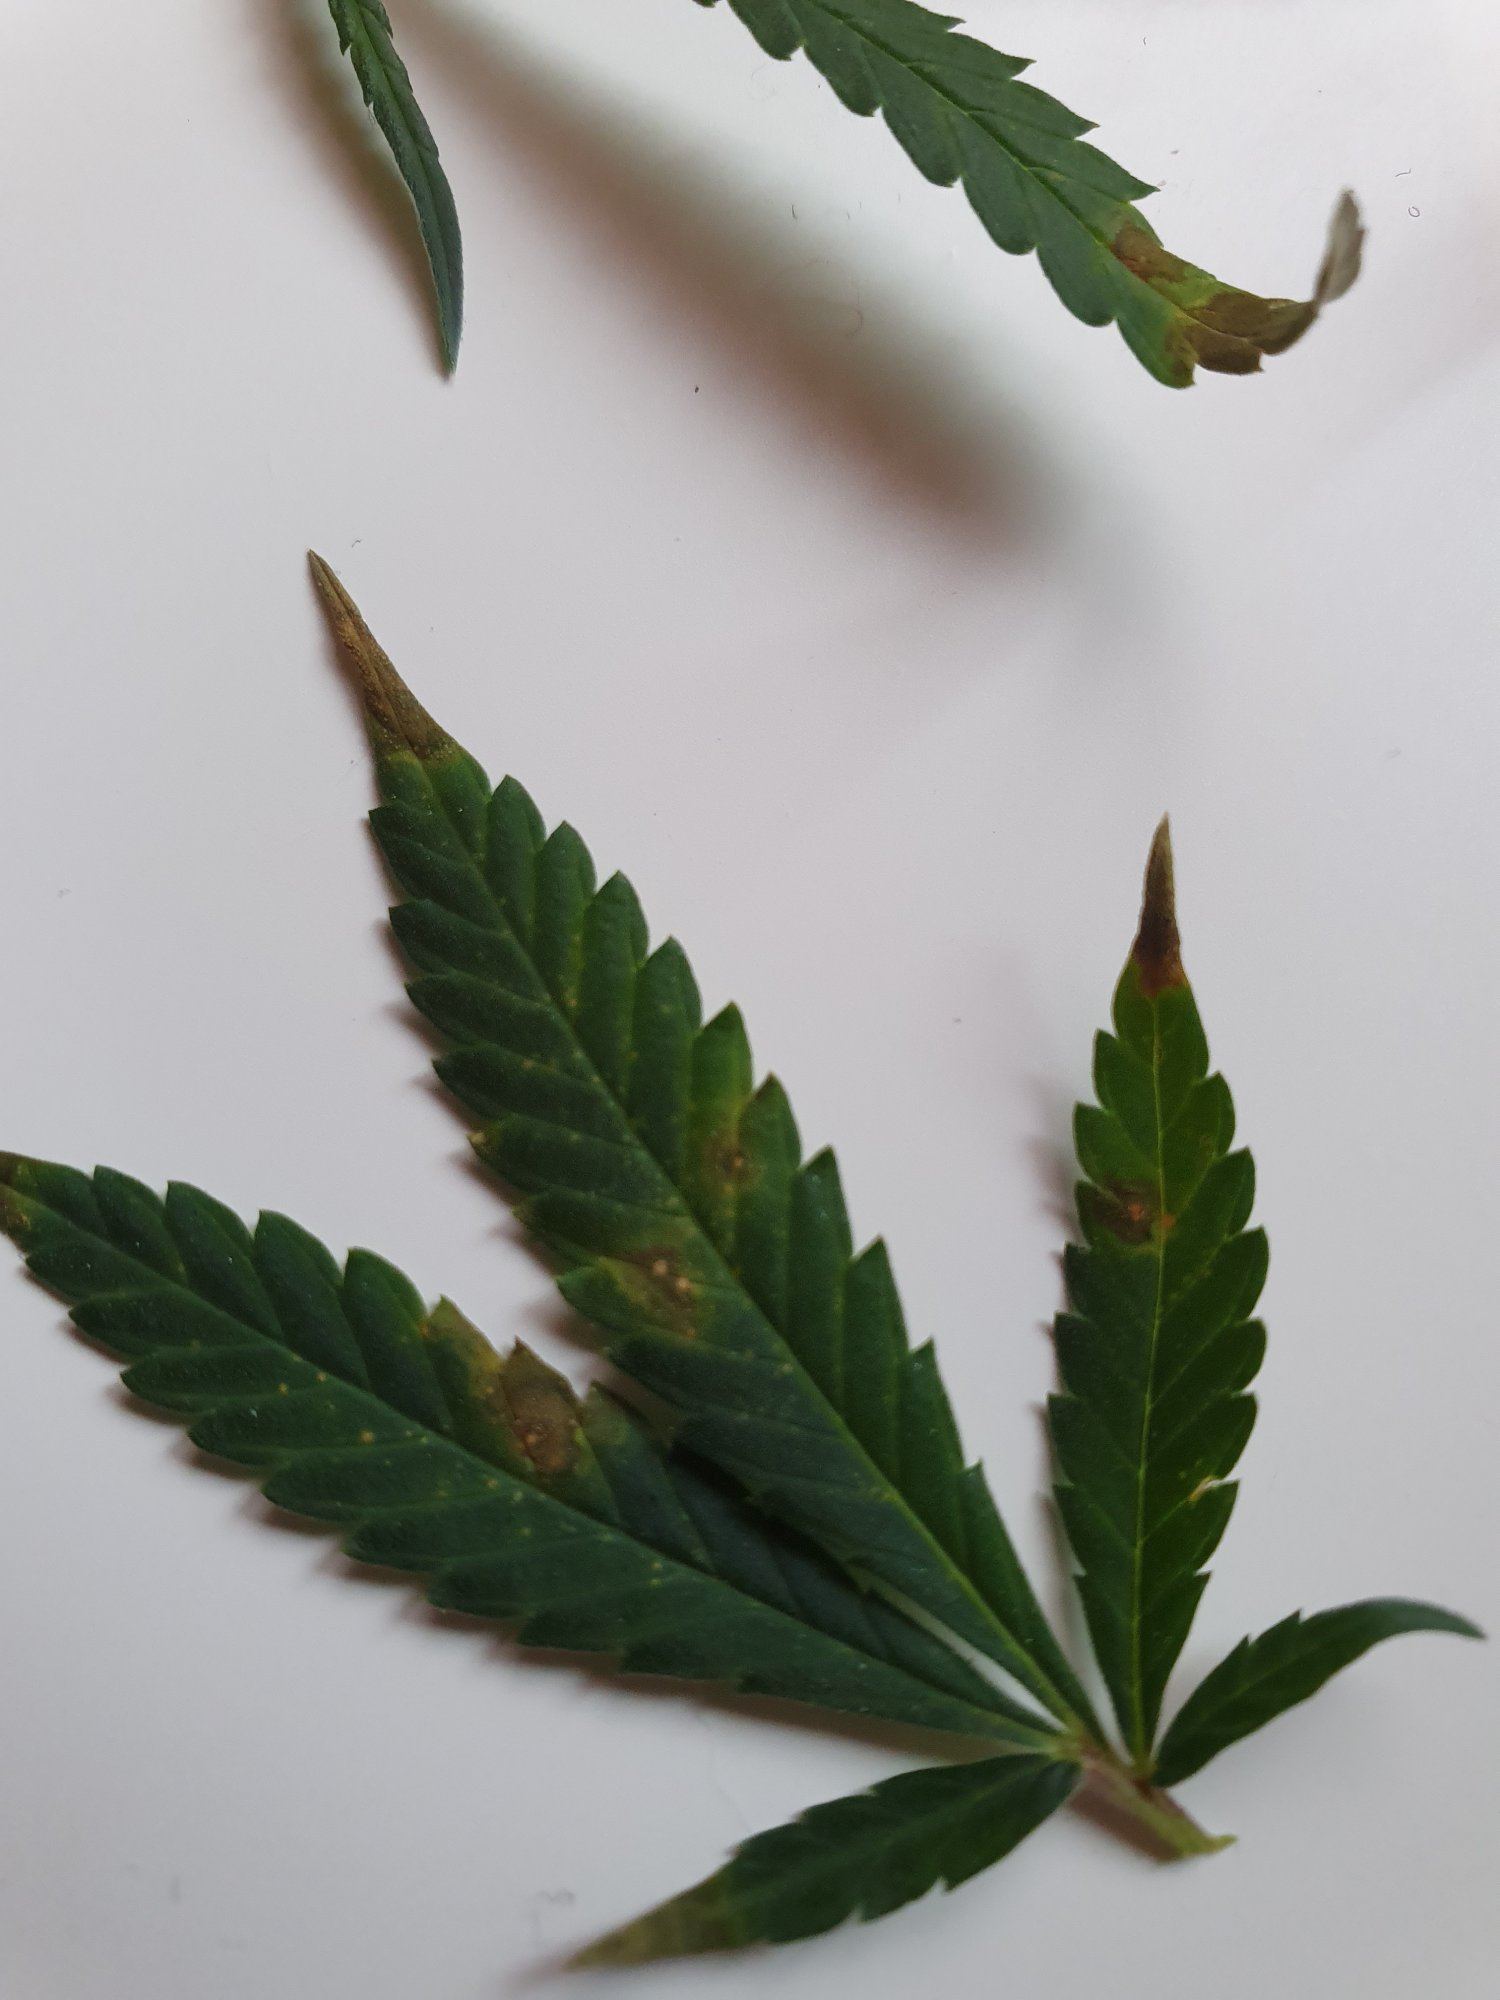 In flowering leaves have brown tips and curl 3